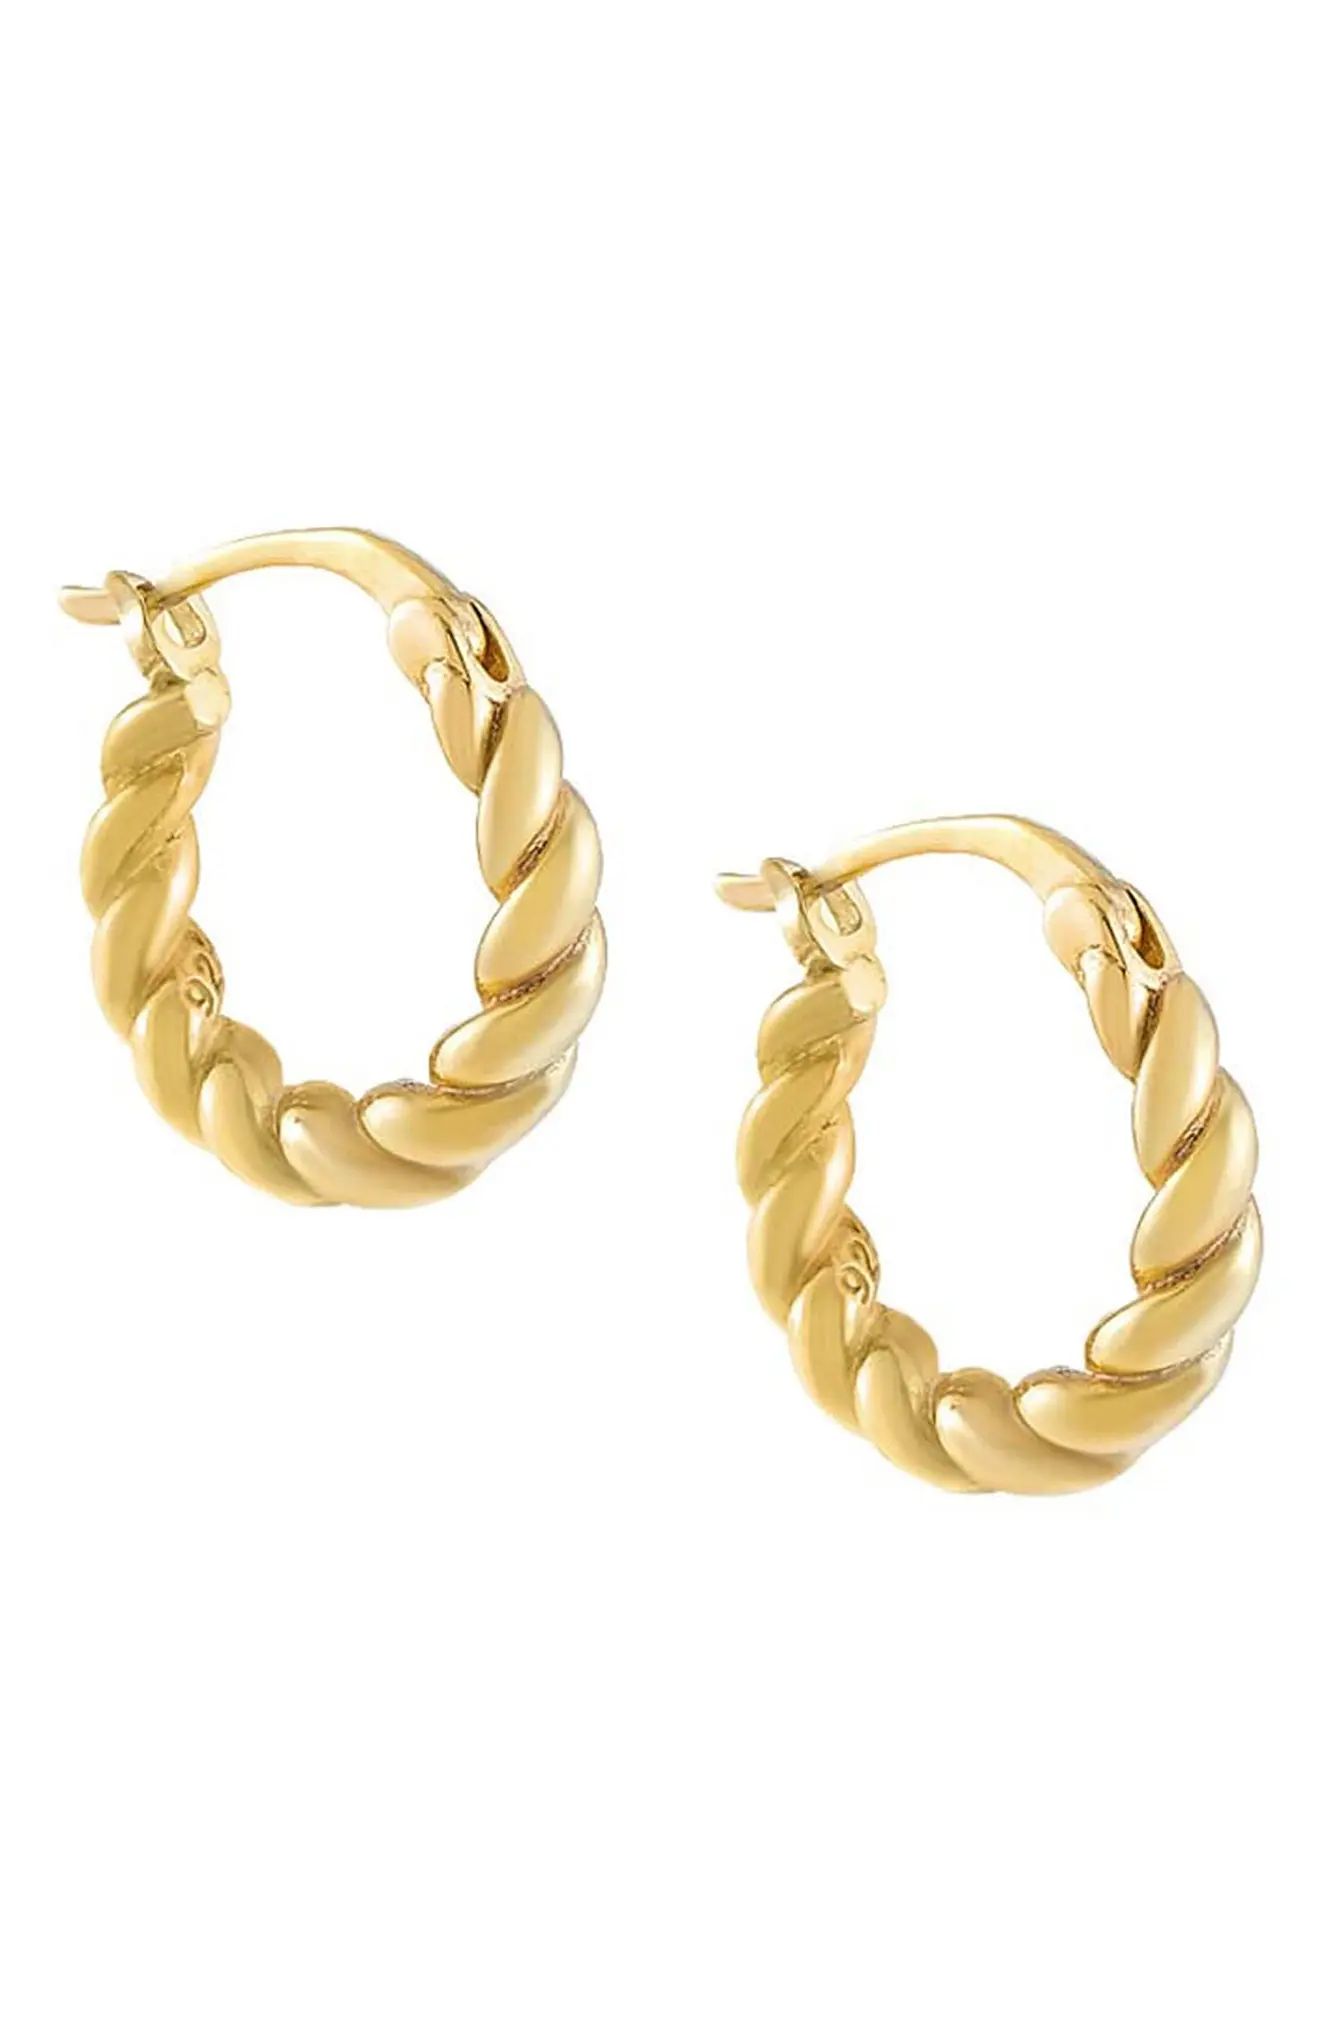 Adina's Jewels Chunky Spiral Hoop Earrings in Gold at Nordstrom | Nordstrom